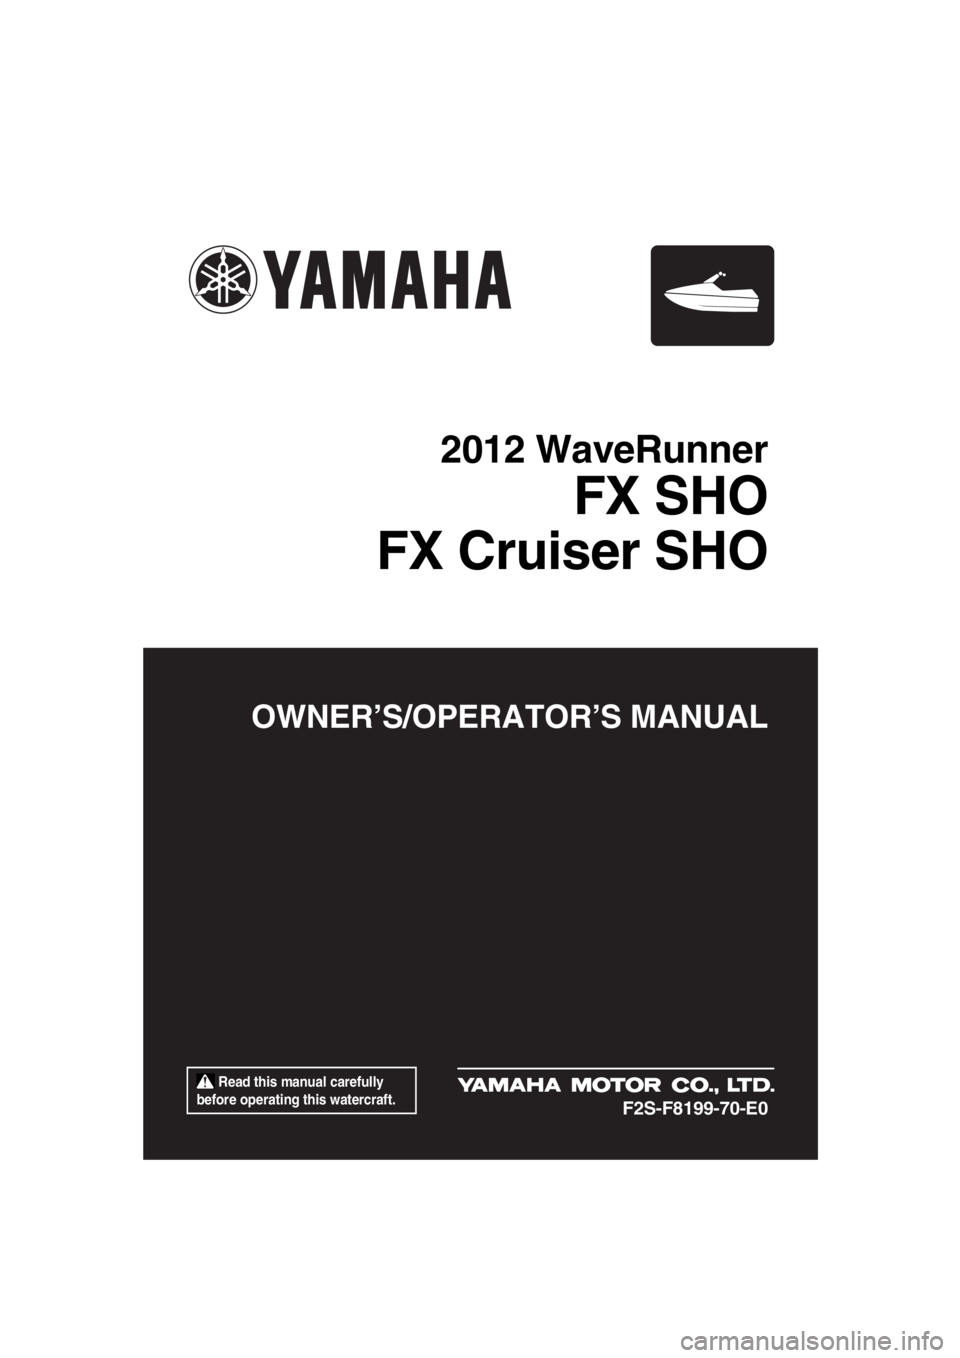 YAMAHA FX SHO 2012  Owners Manual  Read this manual carefully 
before operating this watercraft.
OWNER’S/OPERATOR’S MANUAL
2012 WaveRunner
FX SHO
FX Cruiser SHO
F2S-F8199-70-E0
UF2S70E0.book  Page 1  Wednesday, December 7, 2011  3